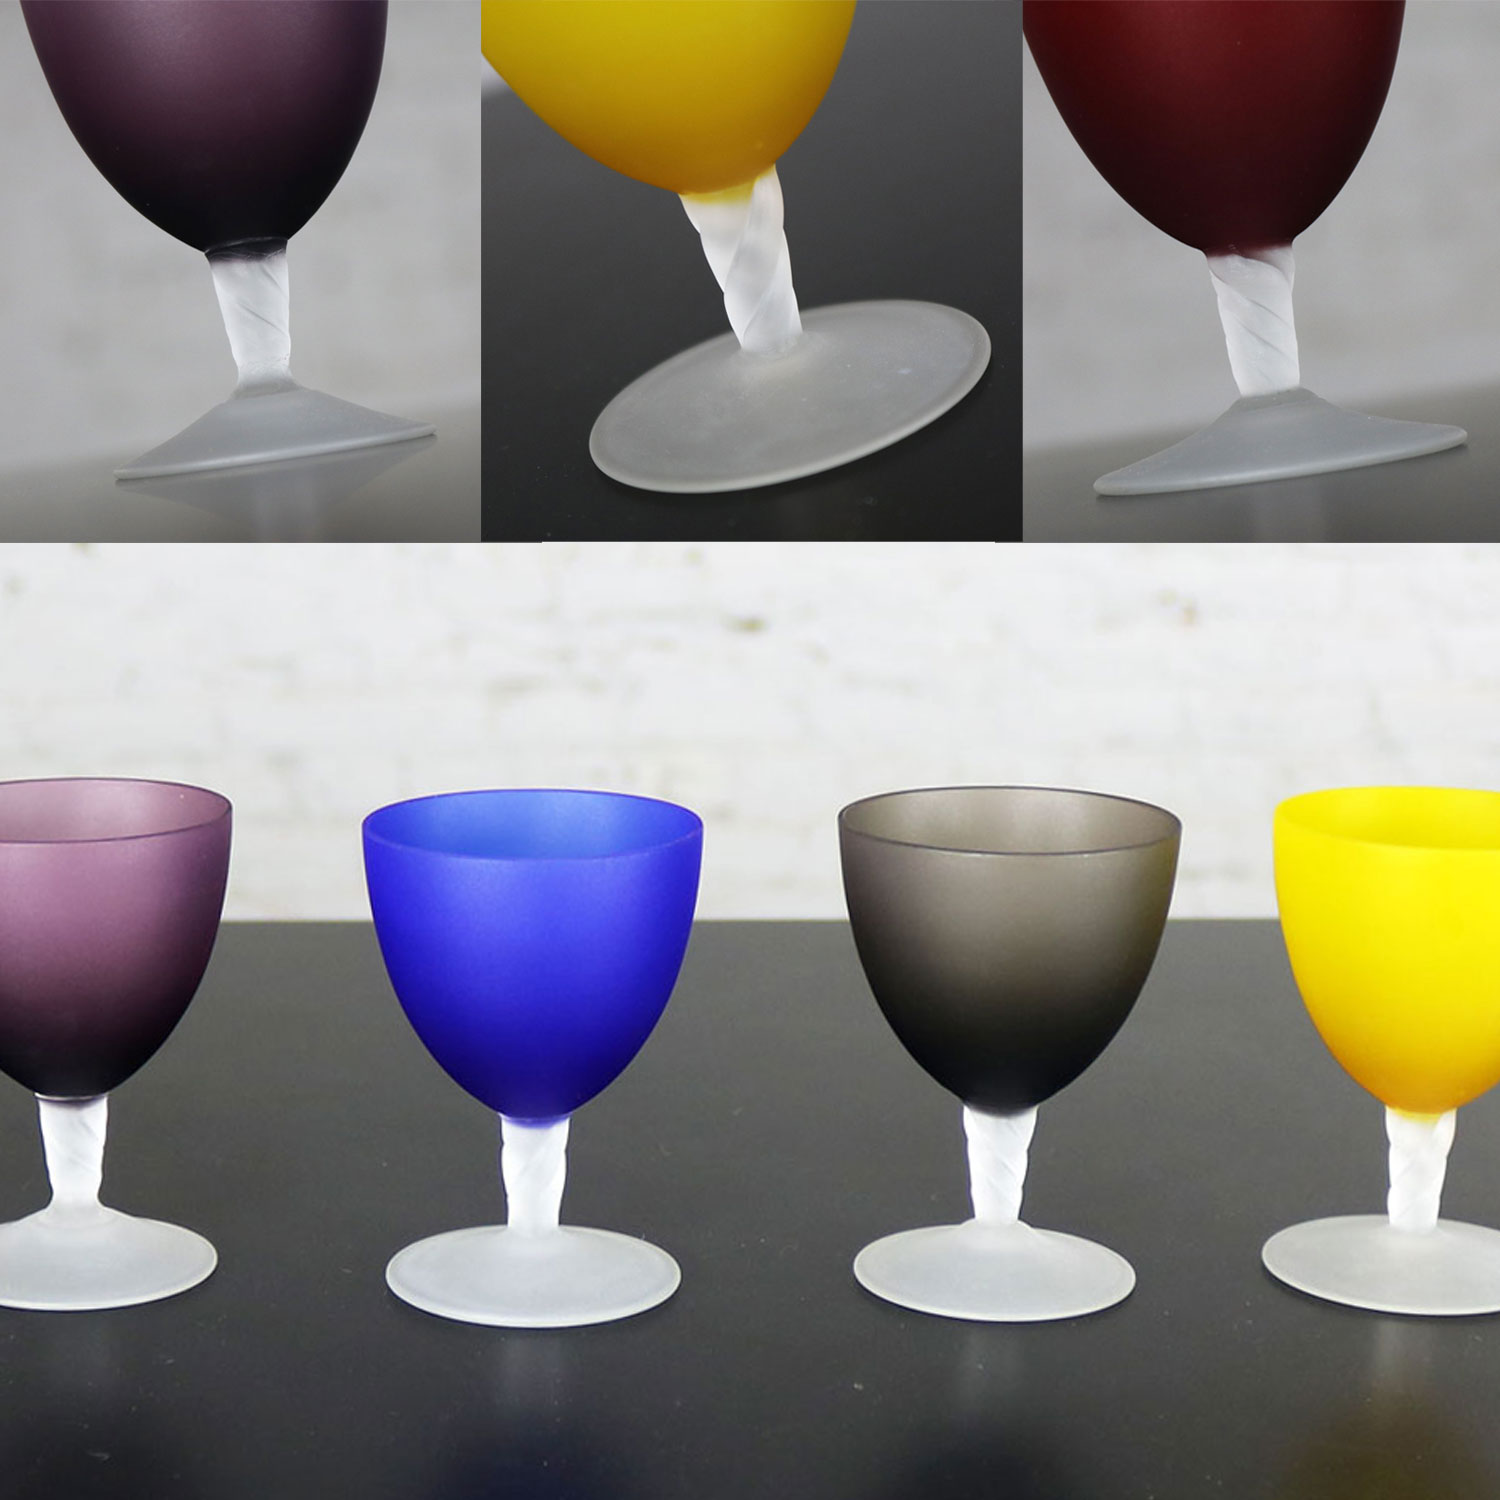 Set of 5 Small Multi-Colored Frosted Glass Wine Coupes or Cordial Glasses